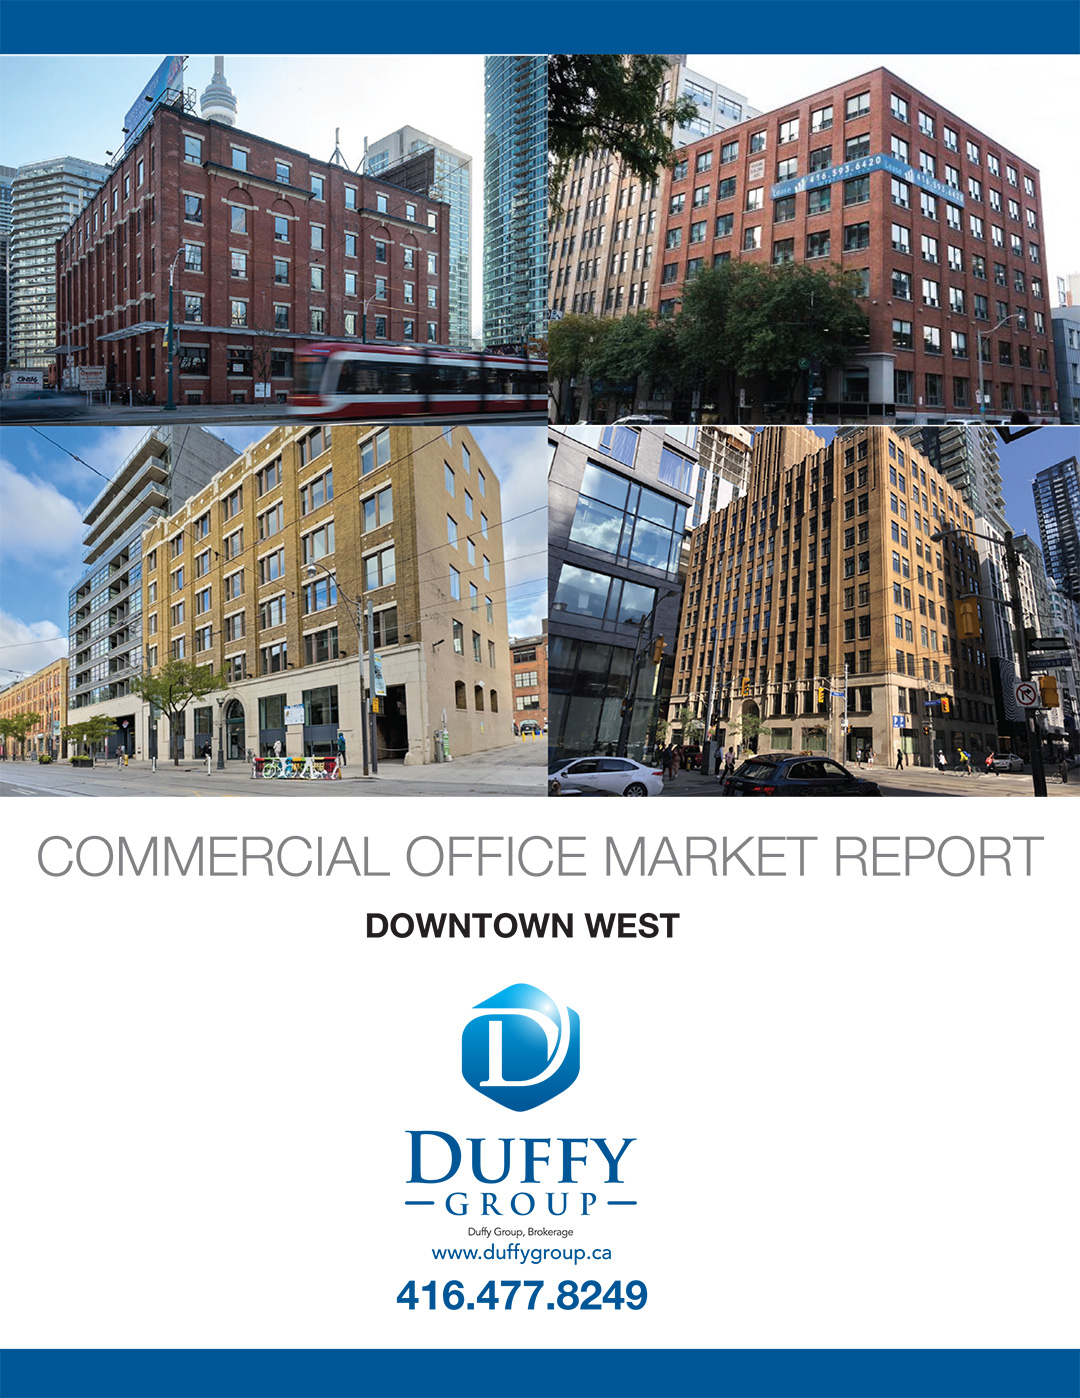 duffy-group-downtown-west-1